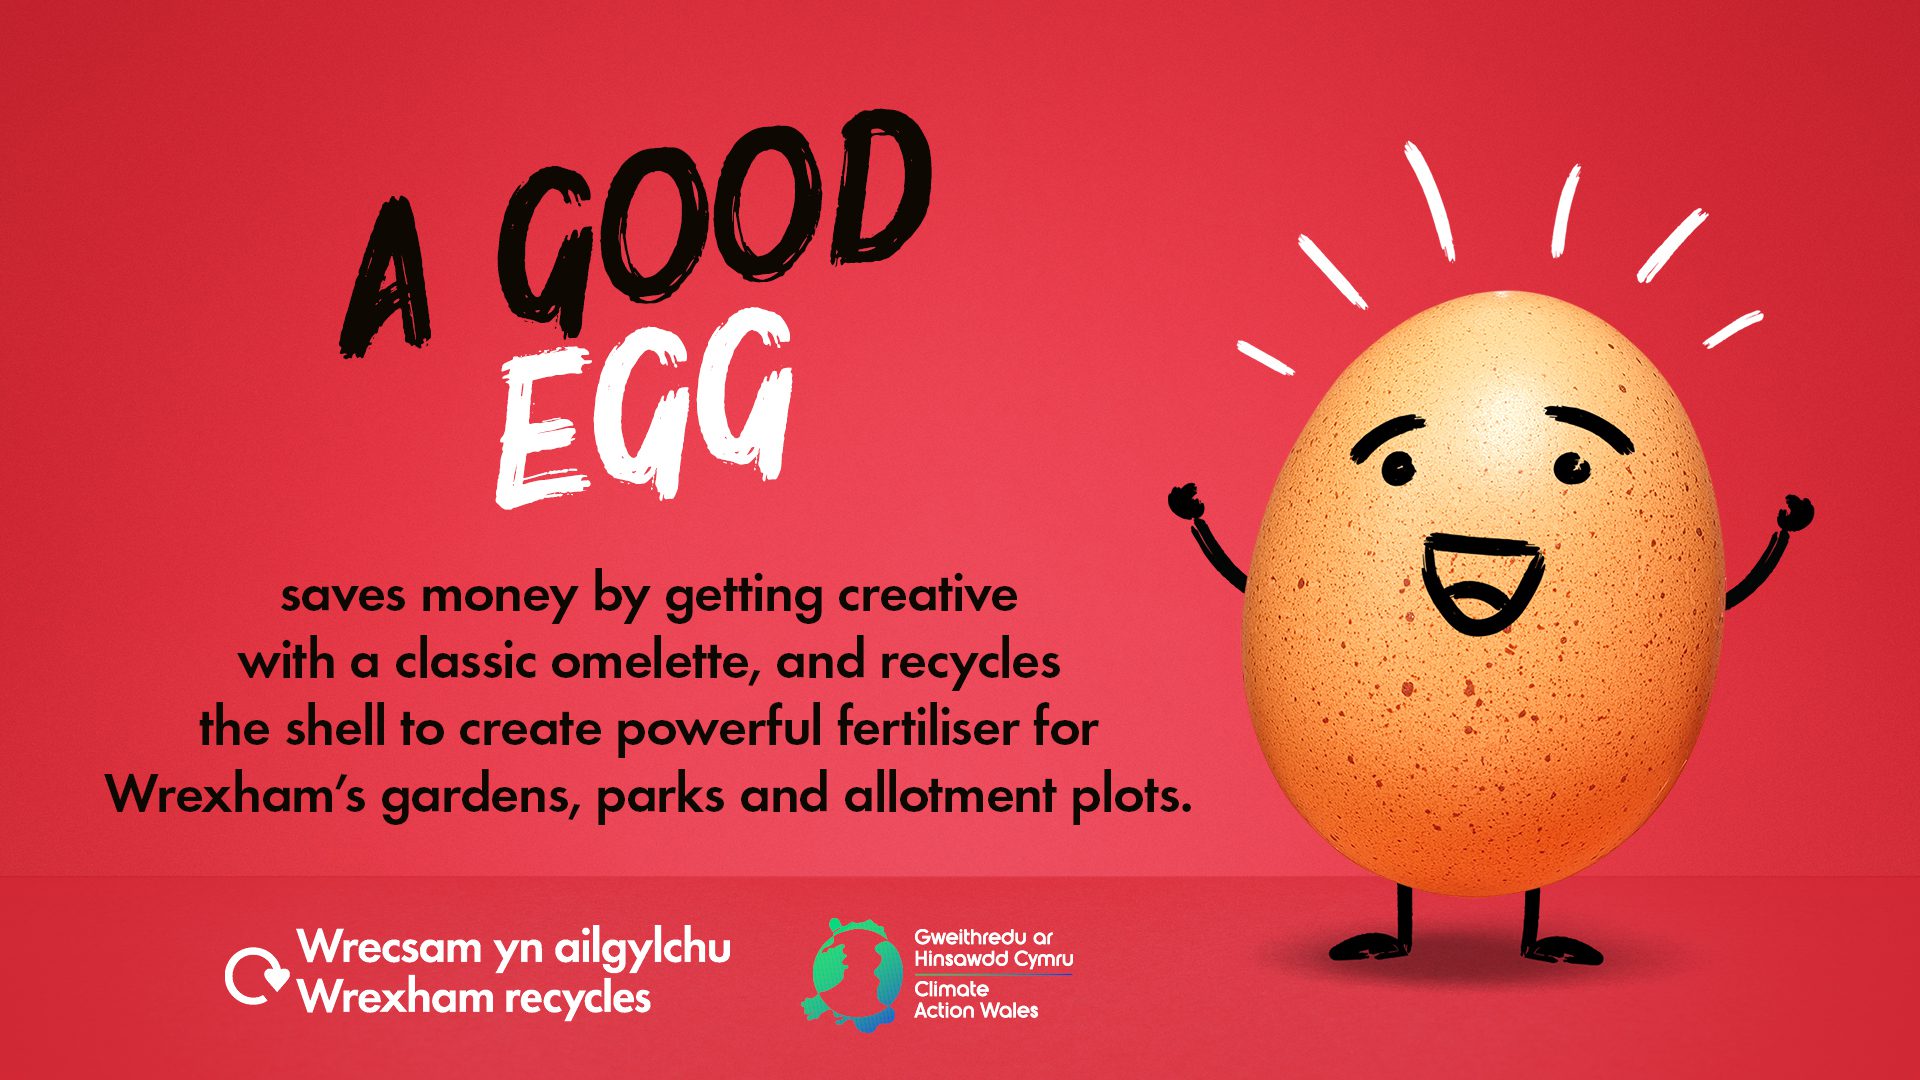 Food waste - Be Mighty, Recycle